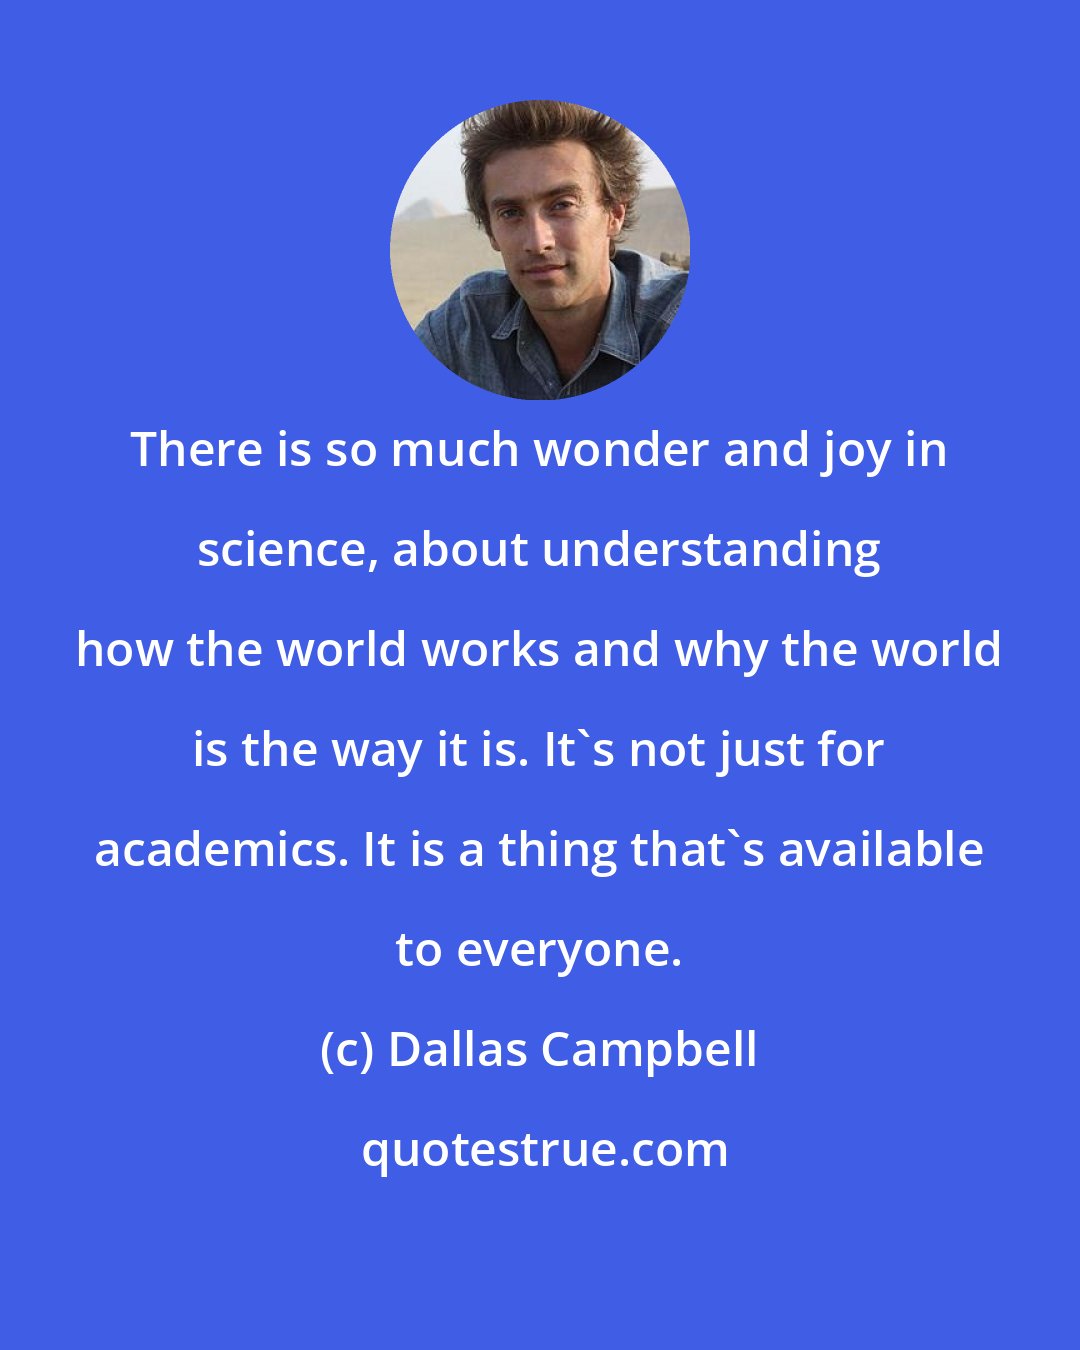 Dallas Campbell: There is so much wonder and joy in science, about understanding how the world works and why the world is the way it is. It's not just for academics. It is a thing that's available to everyone.